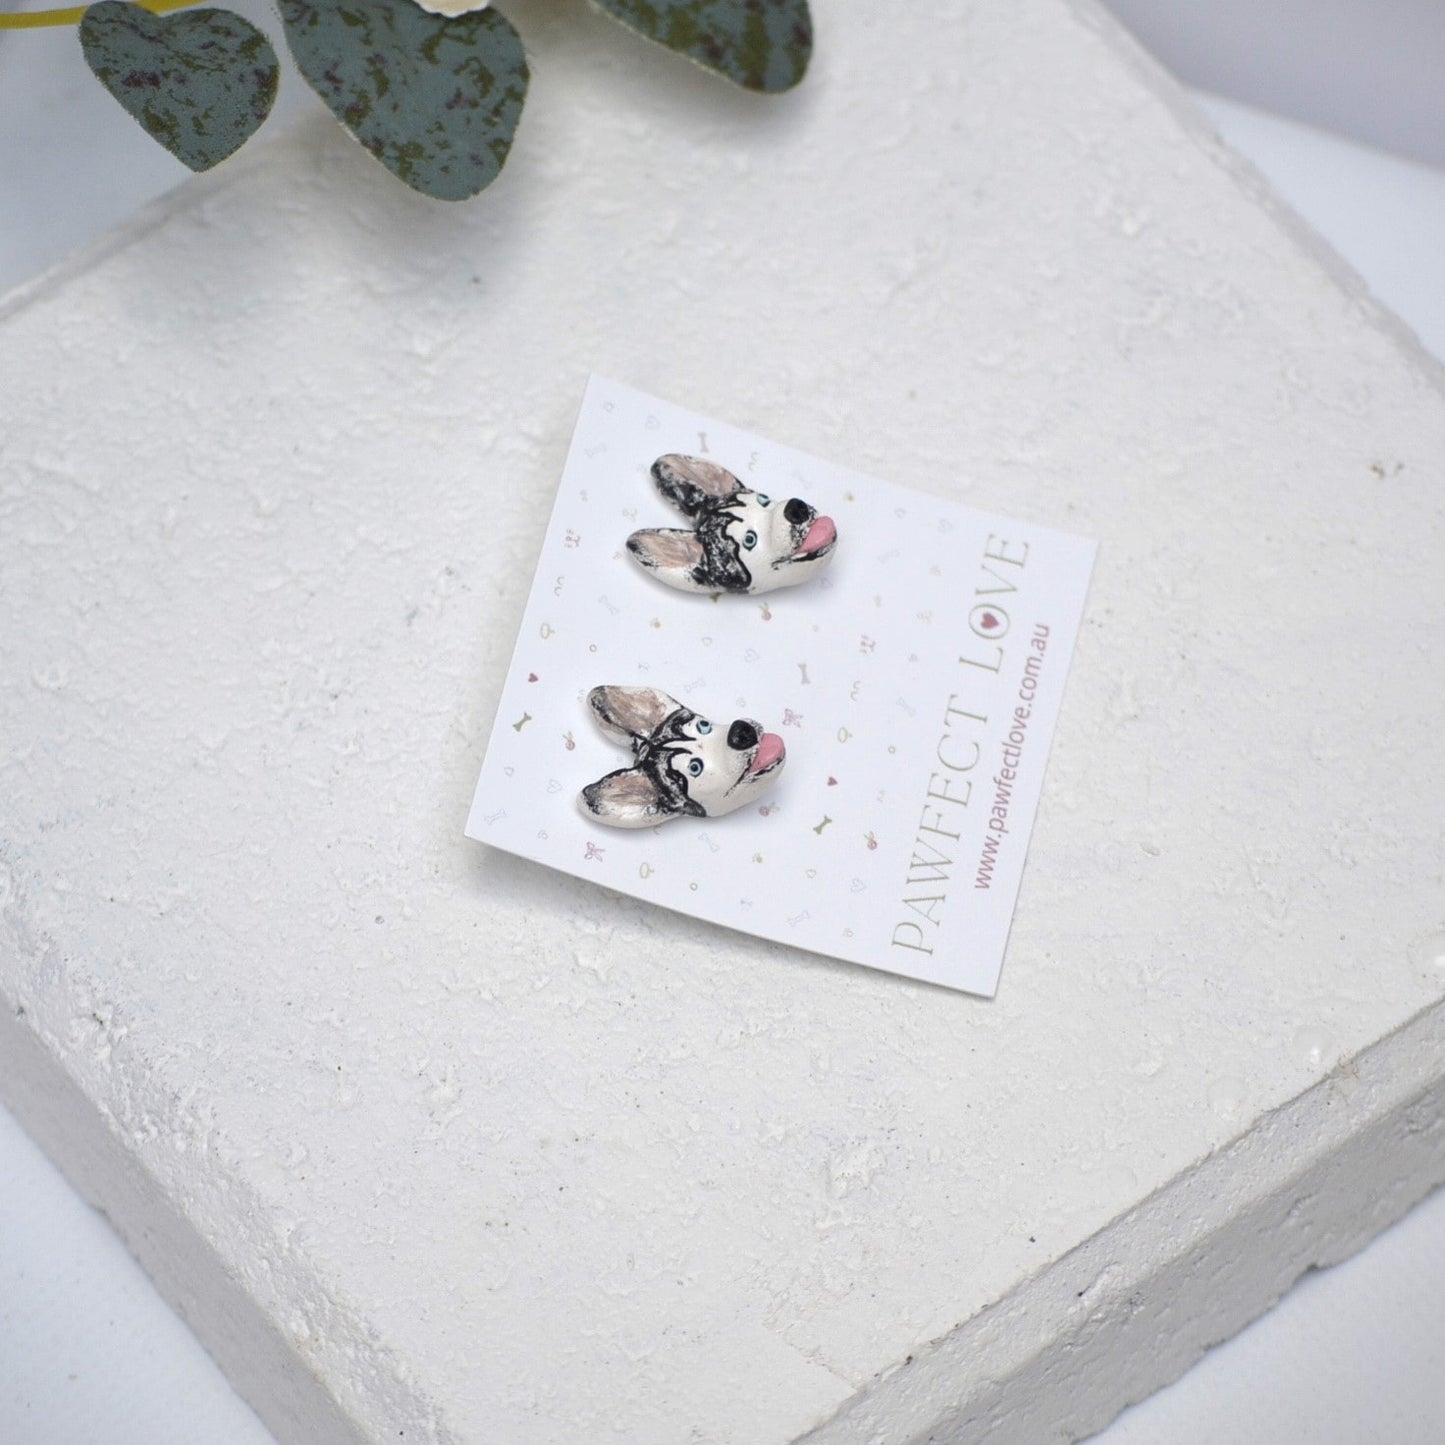 Handmade husky stud earrings by Pawfect Love, positioned in front of white paver